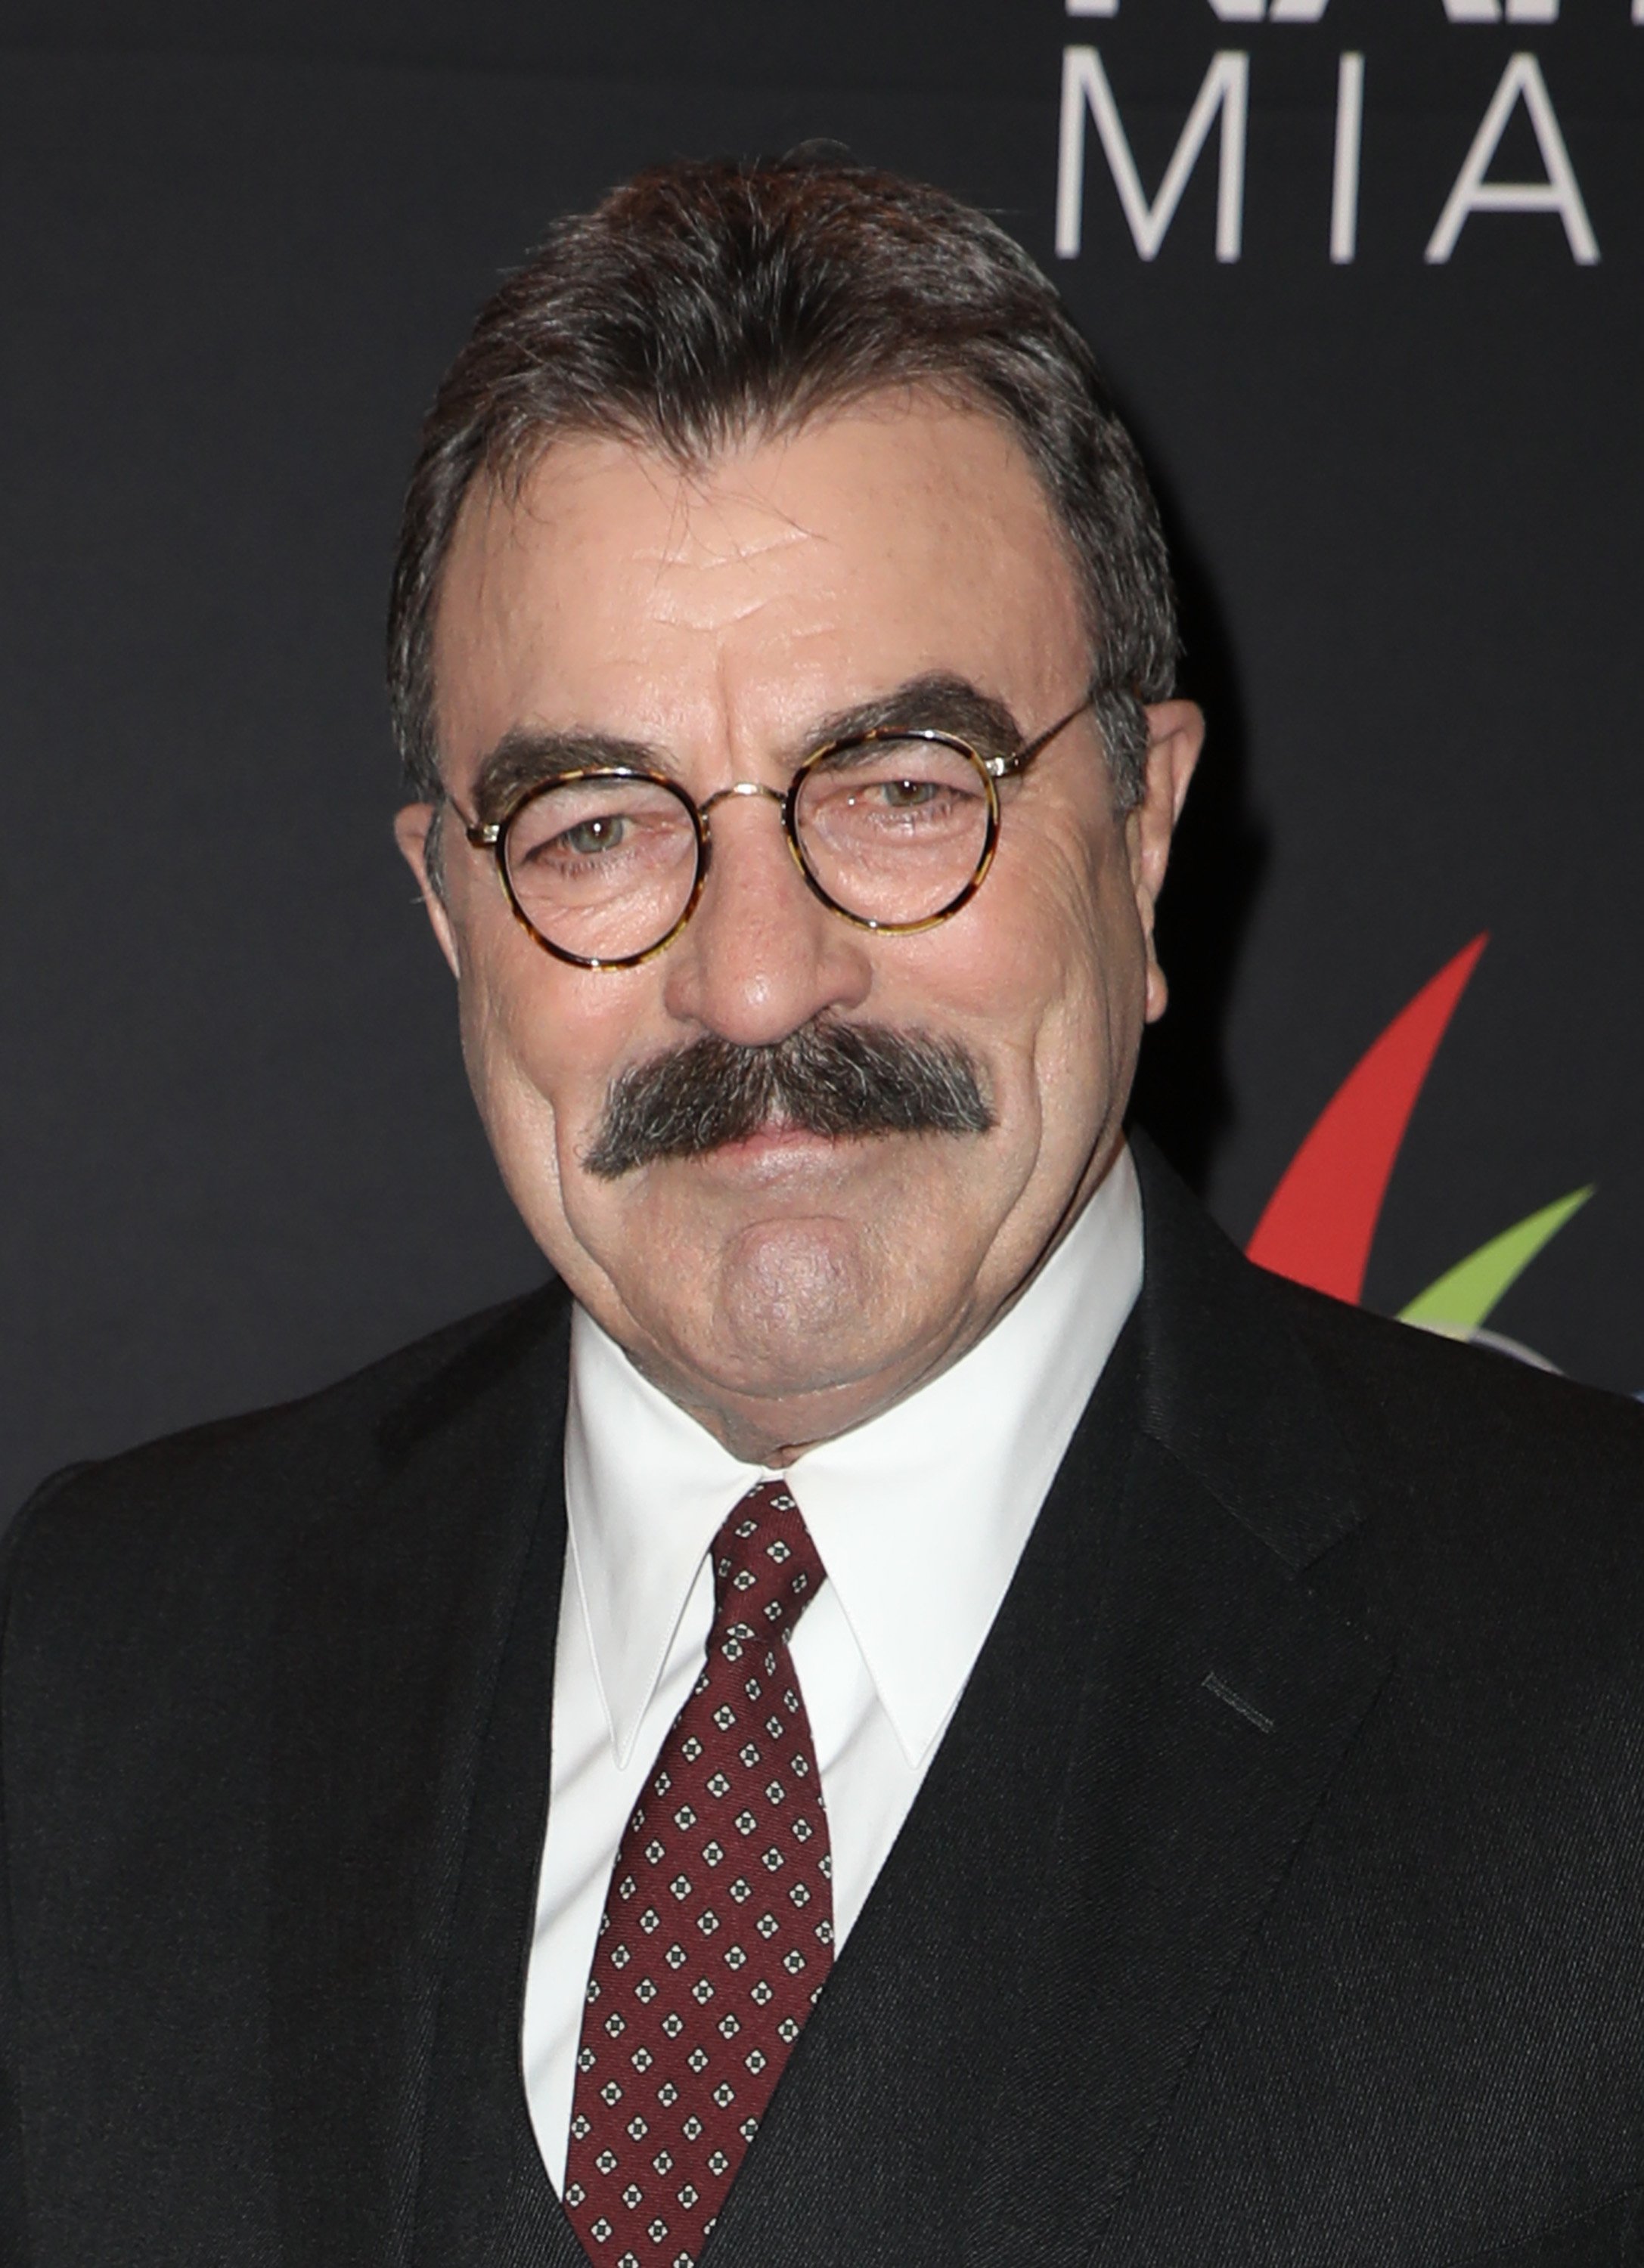 Tom Selleck at the Brandon Tartikoff Legacy Awards on January 17, 2018, in Florida. | Source: Getty Images